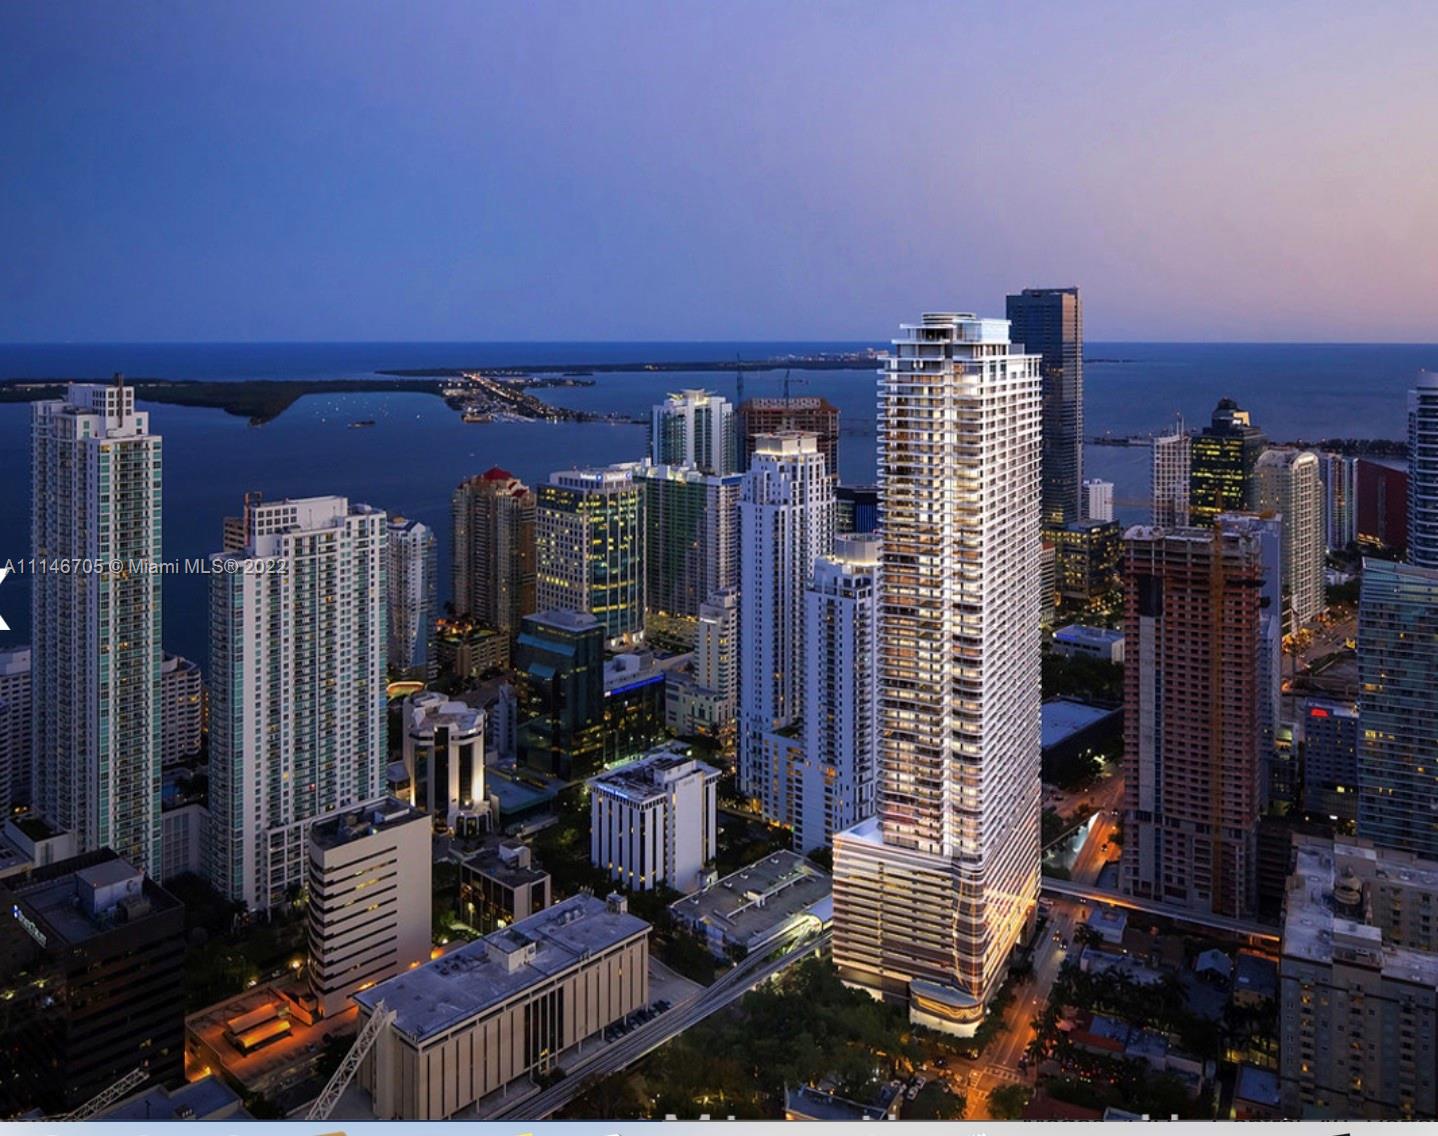 Flatiron is one of the few new luxury buildings, located in Brickell Area. 2BD/2,5 Bath unit has city view, located on the very quiet 36th floor. Enjoy beautiful Miami Sunset from floor-to-ceiling glass doors. Italian, Snaidero Kitchen cabinetry and Miele appliances. Nest thermometer and keyless entry system. Built-out California closets and window treatments including blackouts in the BD. Porcelain flooring throughout, with marble in the master bathroom. three levels of amenities for your enjoyment: sky club on the 64 floor featuring a high-performance fitness studio and gym, and spa with complete massage rooms. Sky pool with panoramic east/west water and city views. 17th and 18th floor lap pool, billards room, screening room, children's playroom and lounge areas. Will be vacant in Feb.